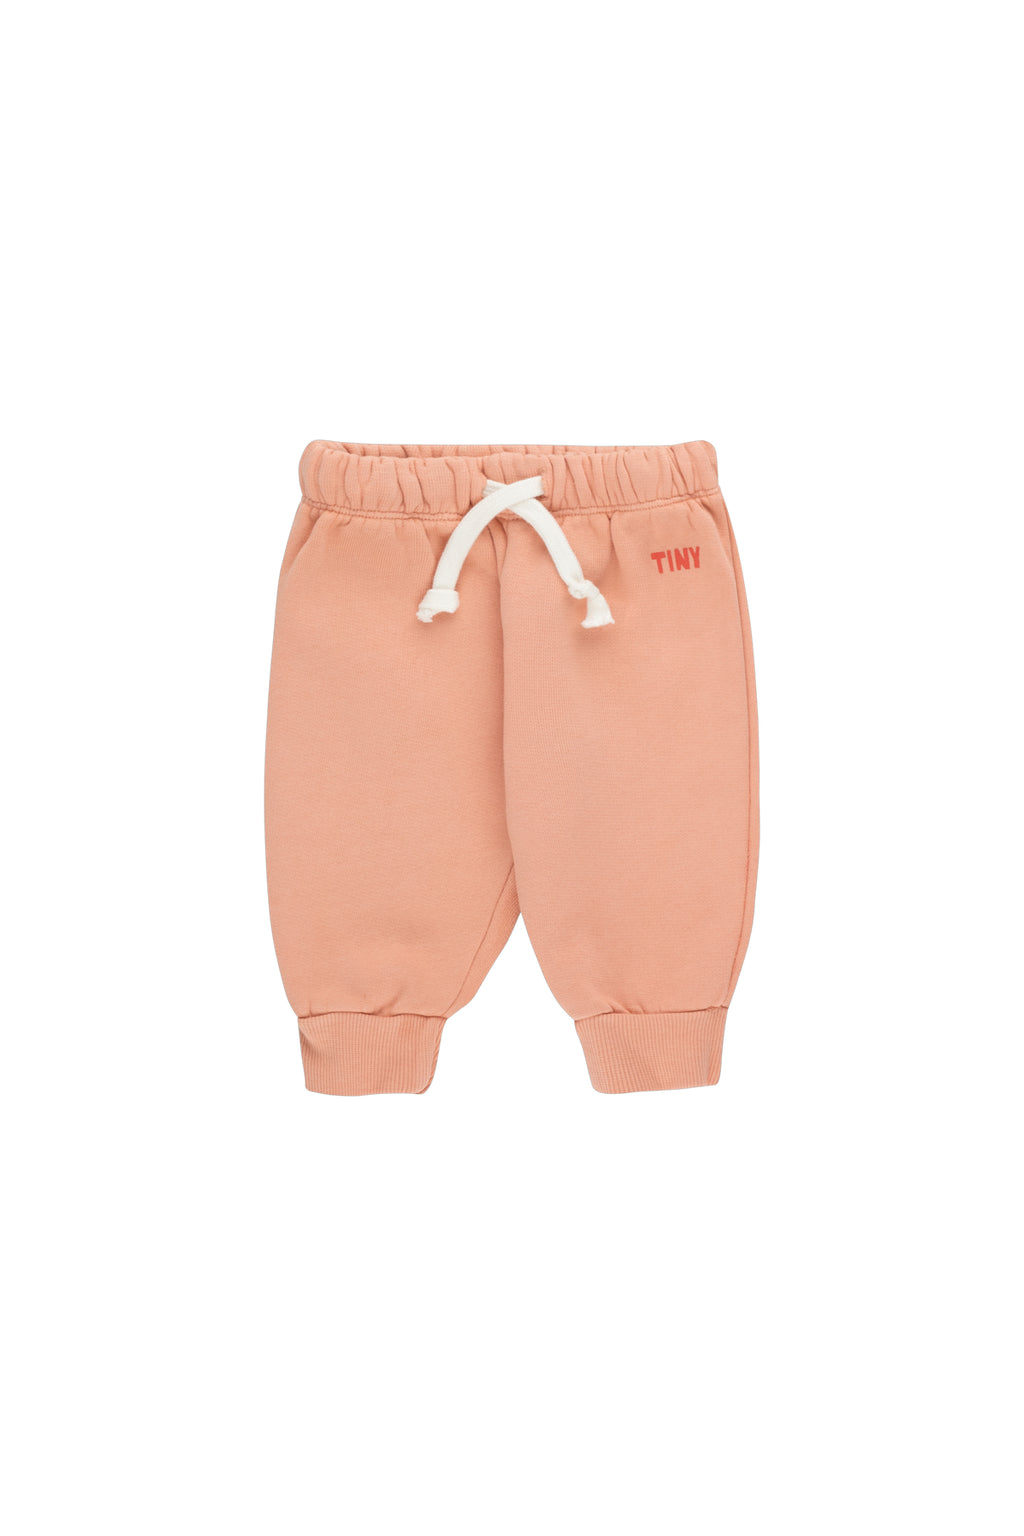 Tiny Cottons Solid Baby Sweatpant - Rose